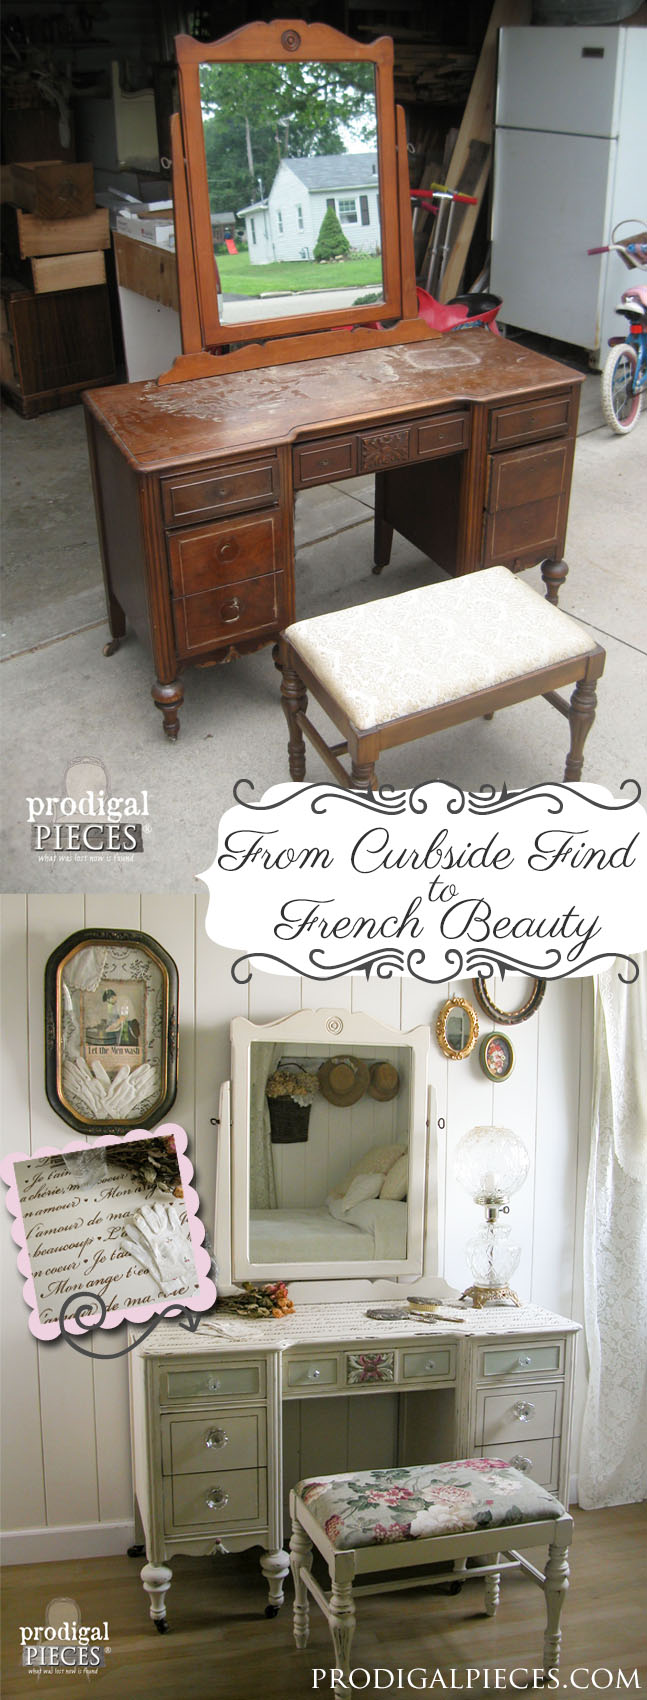 Curbside Vanity is Renewed with Fresh Look and French Script Stenci by Prodigal Pieces | www.prodigalpieces.com